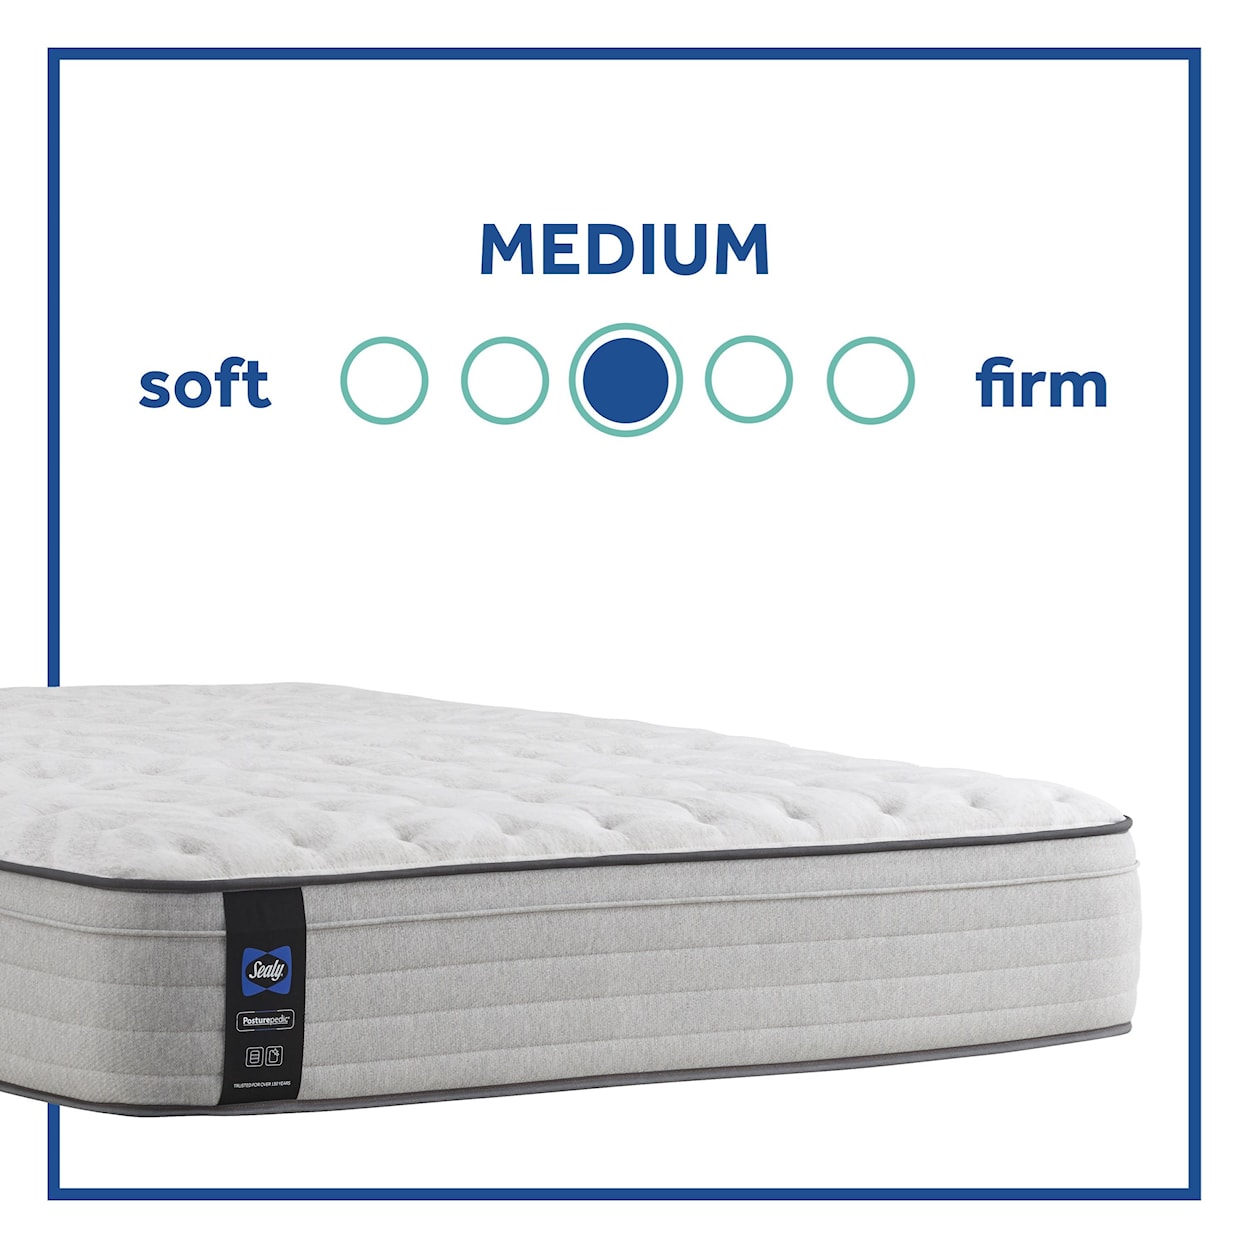 Sealy PPS3 Posturpedic Innerspring Med FXET Twin XL 13" Medium Faux Euro Top Mattress